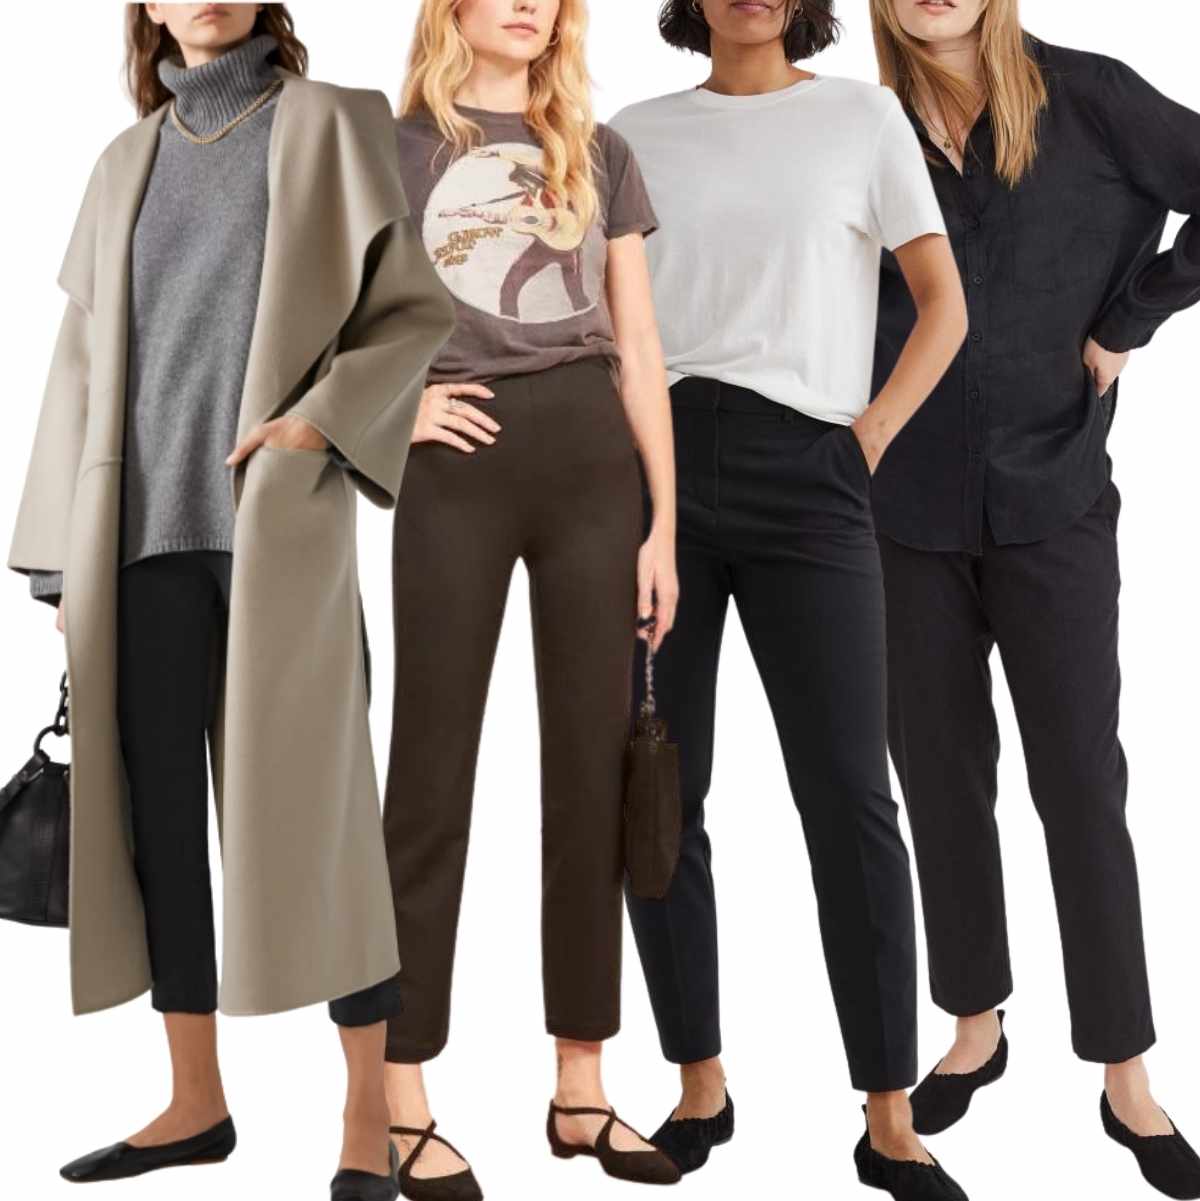 These Womens Cropped Pants Get Rave Reviews from Travelers